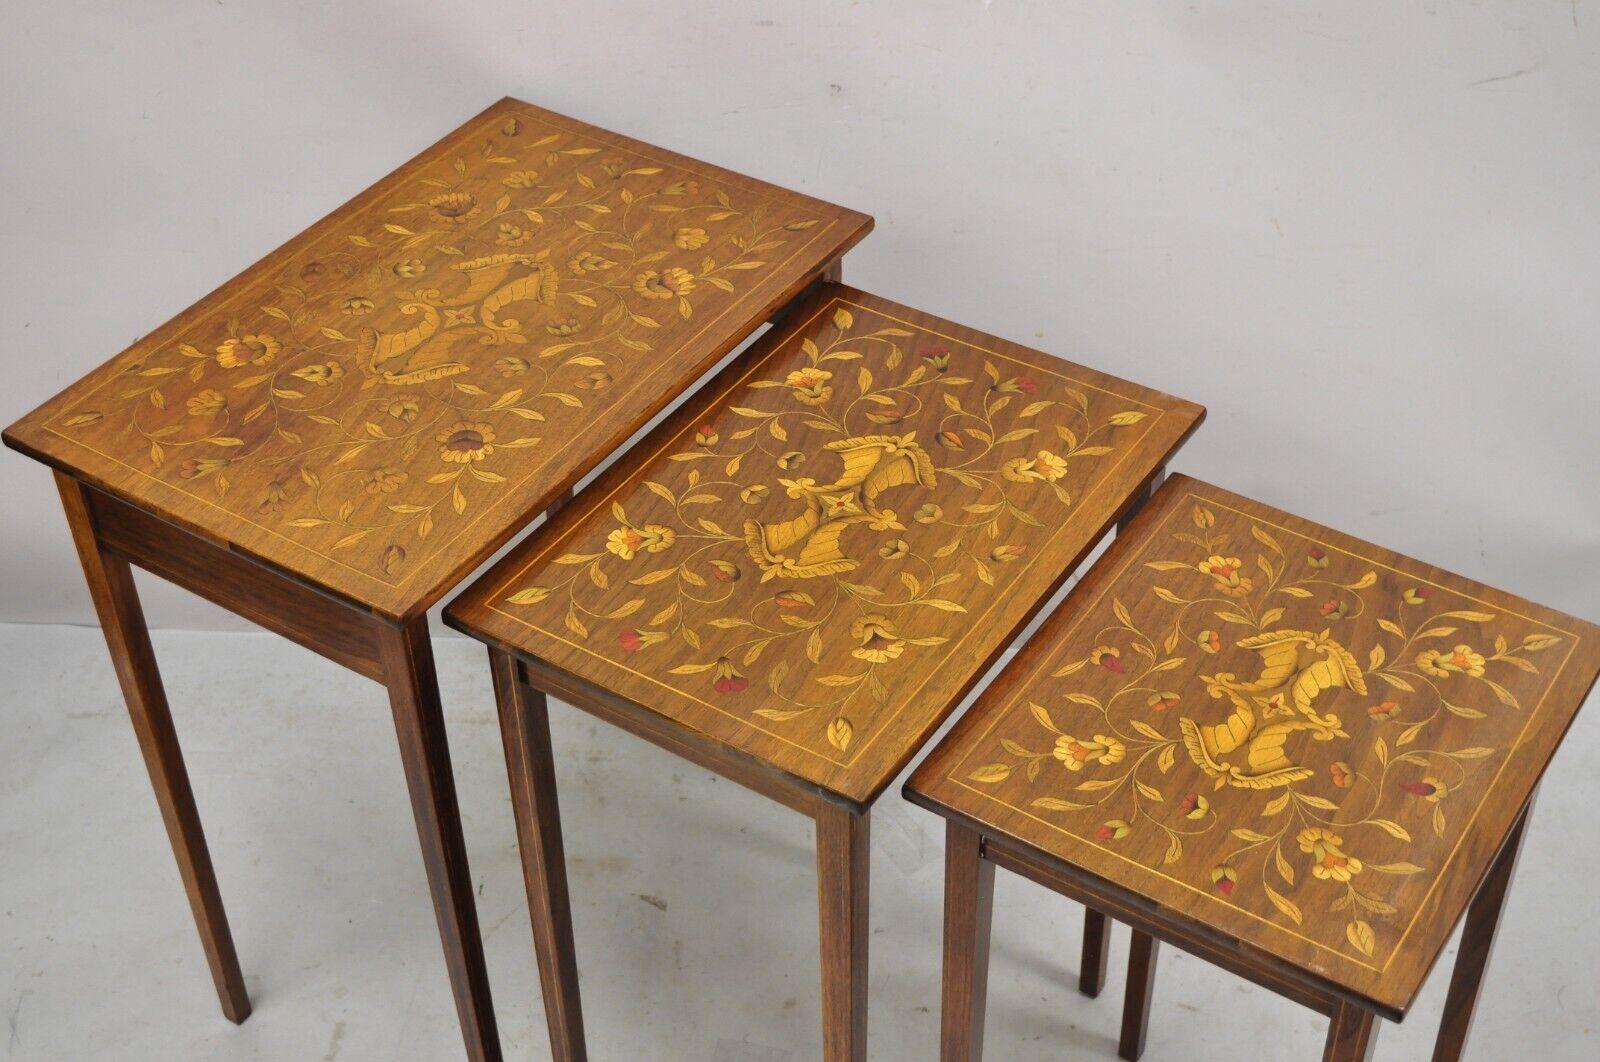 20th Century Antique Dutch Marquetry Inlay Mahogany Nesting Side Tables, 3 Pc Set For Sale